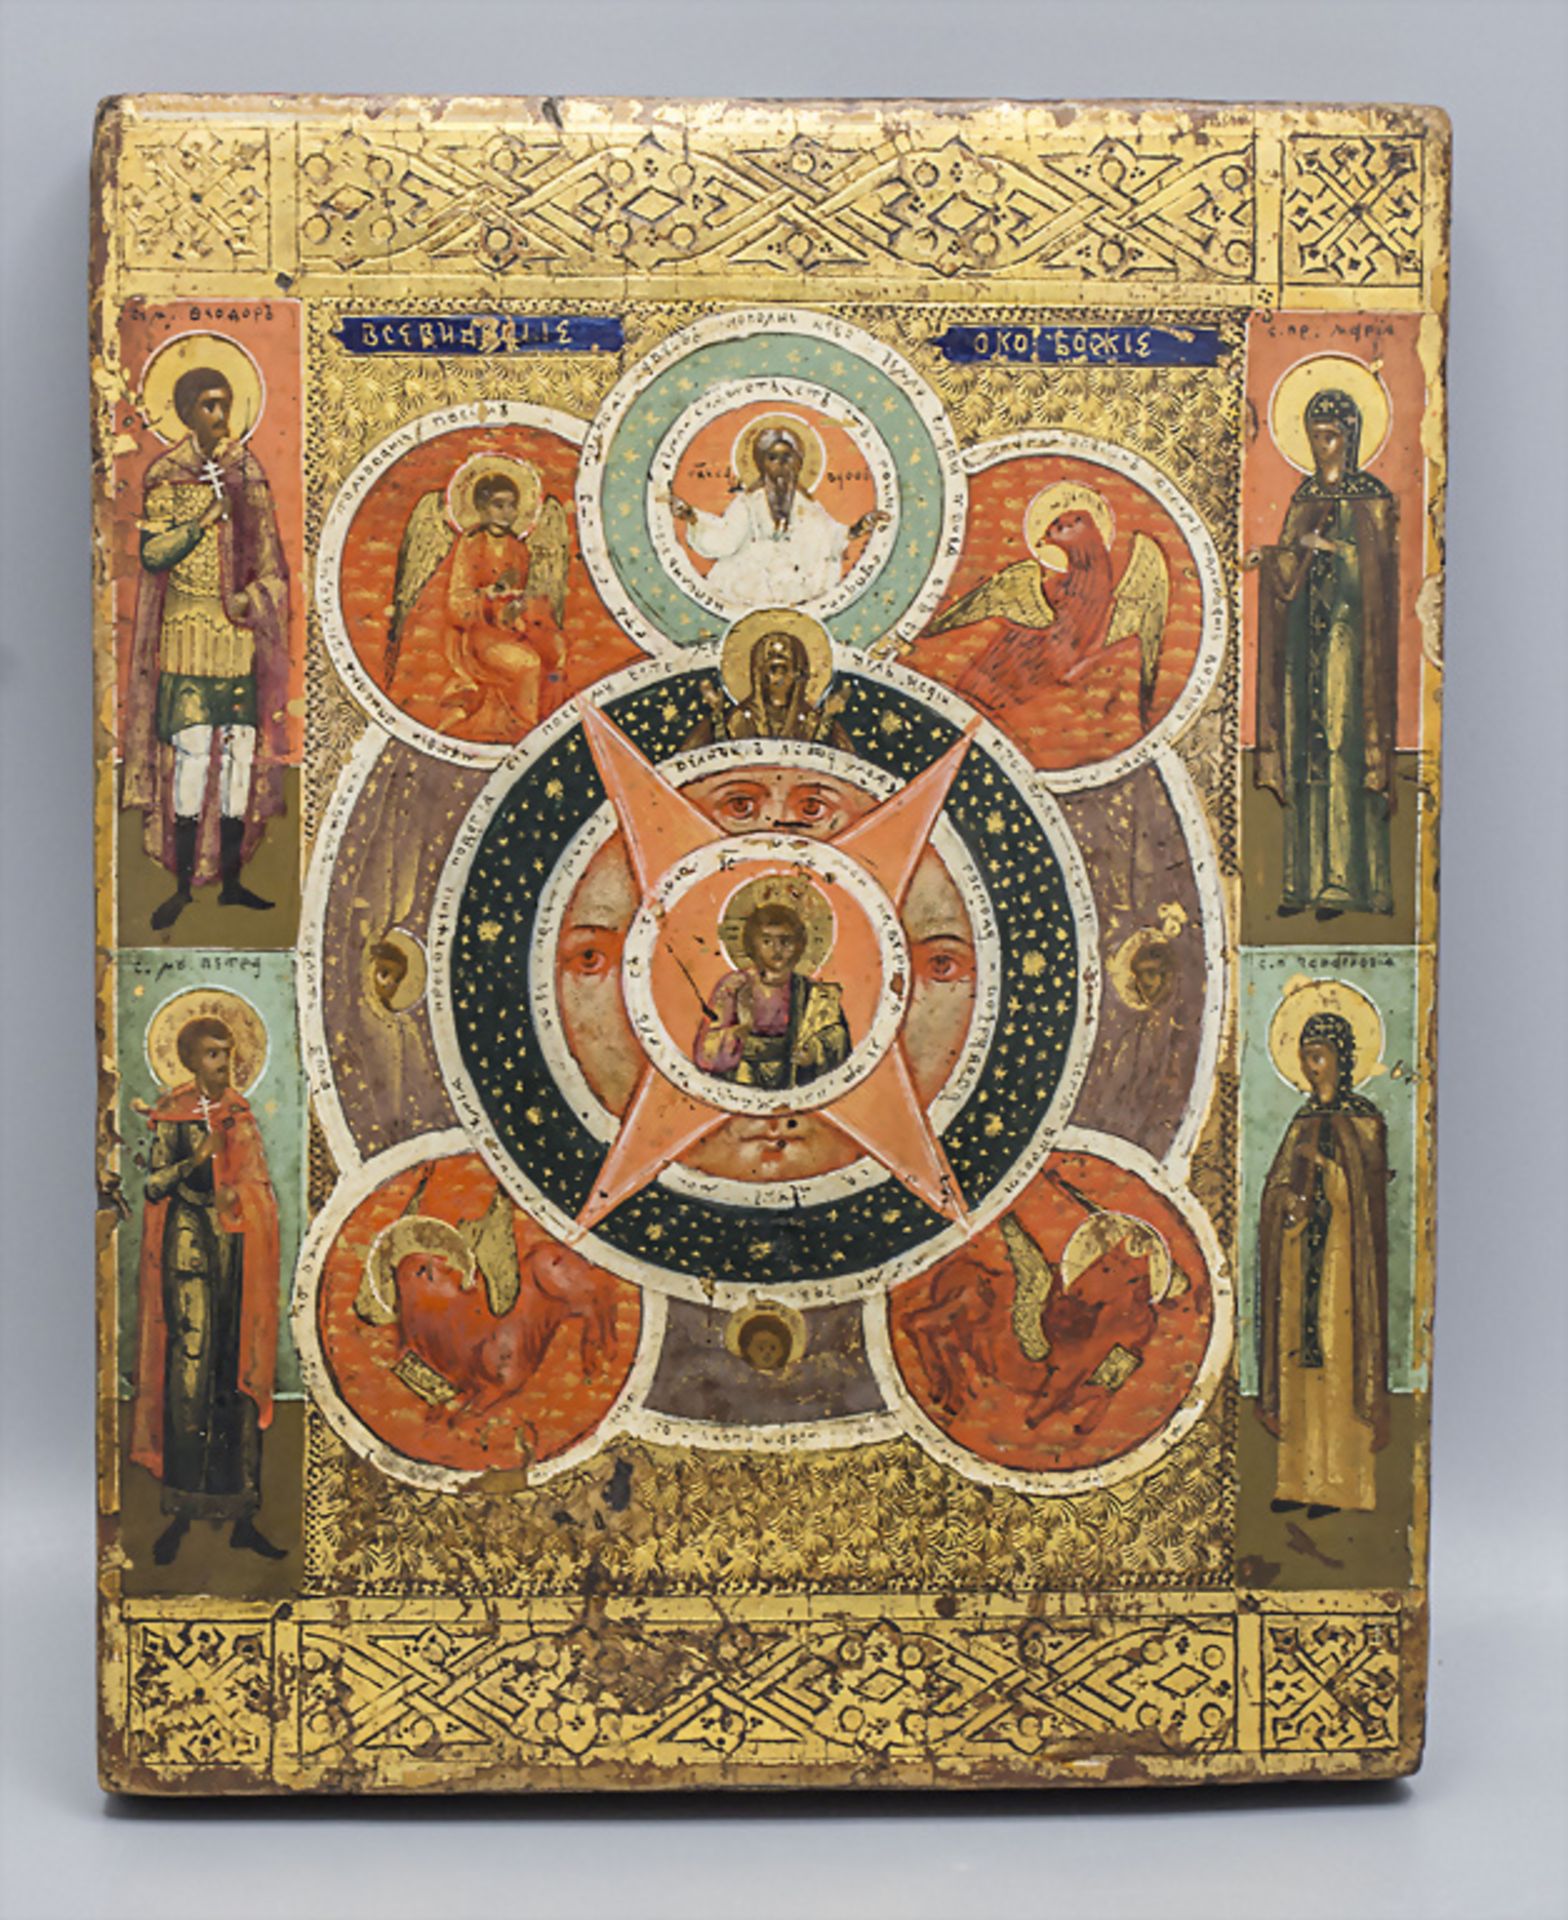 Das allsehende Auge Gottes / The all-seeing eye of God, Russland / Russia, 19. Jh.